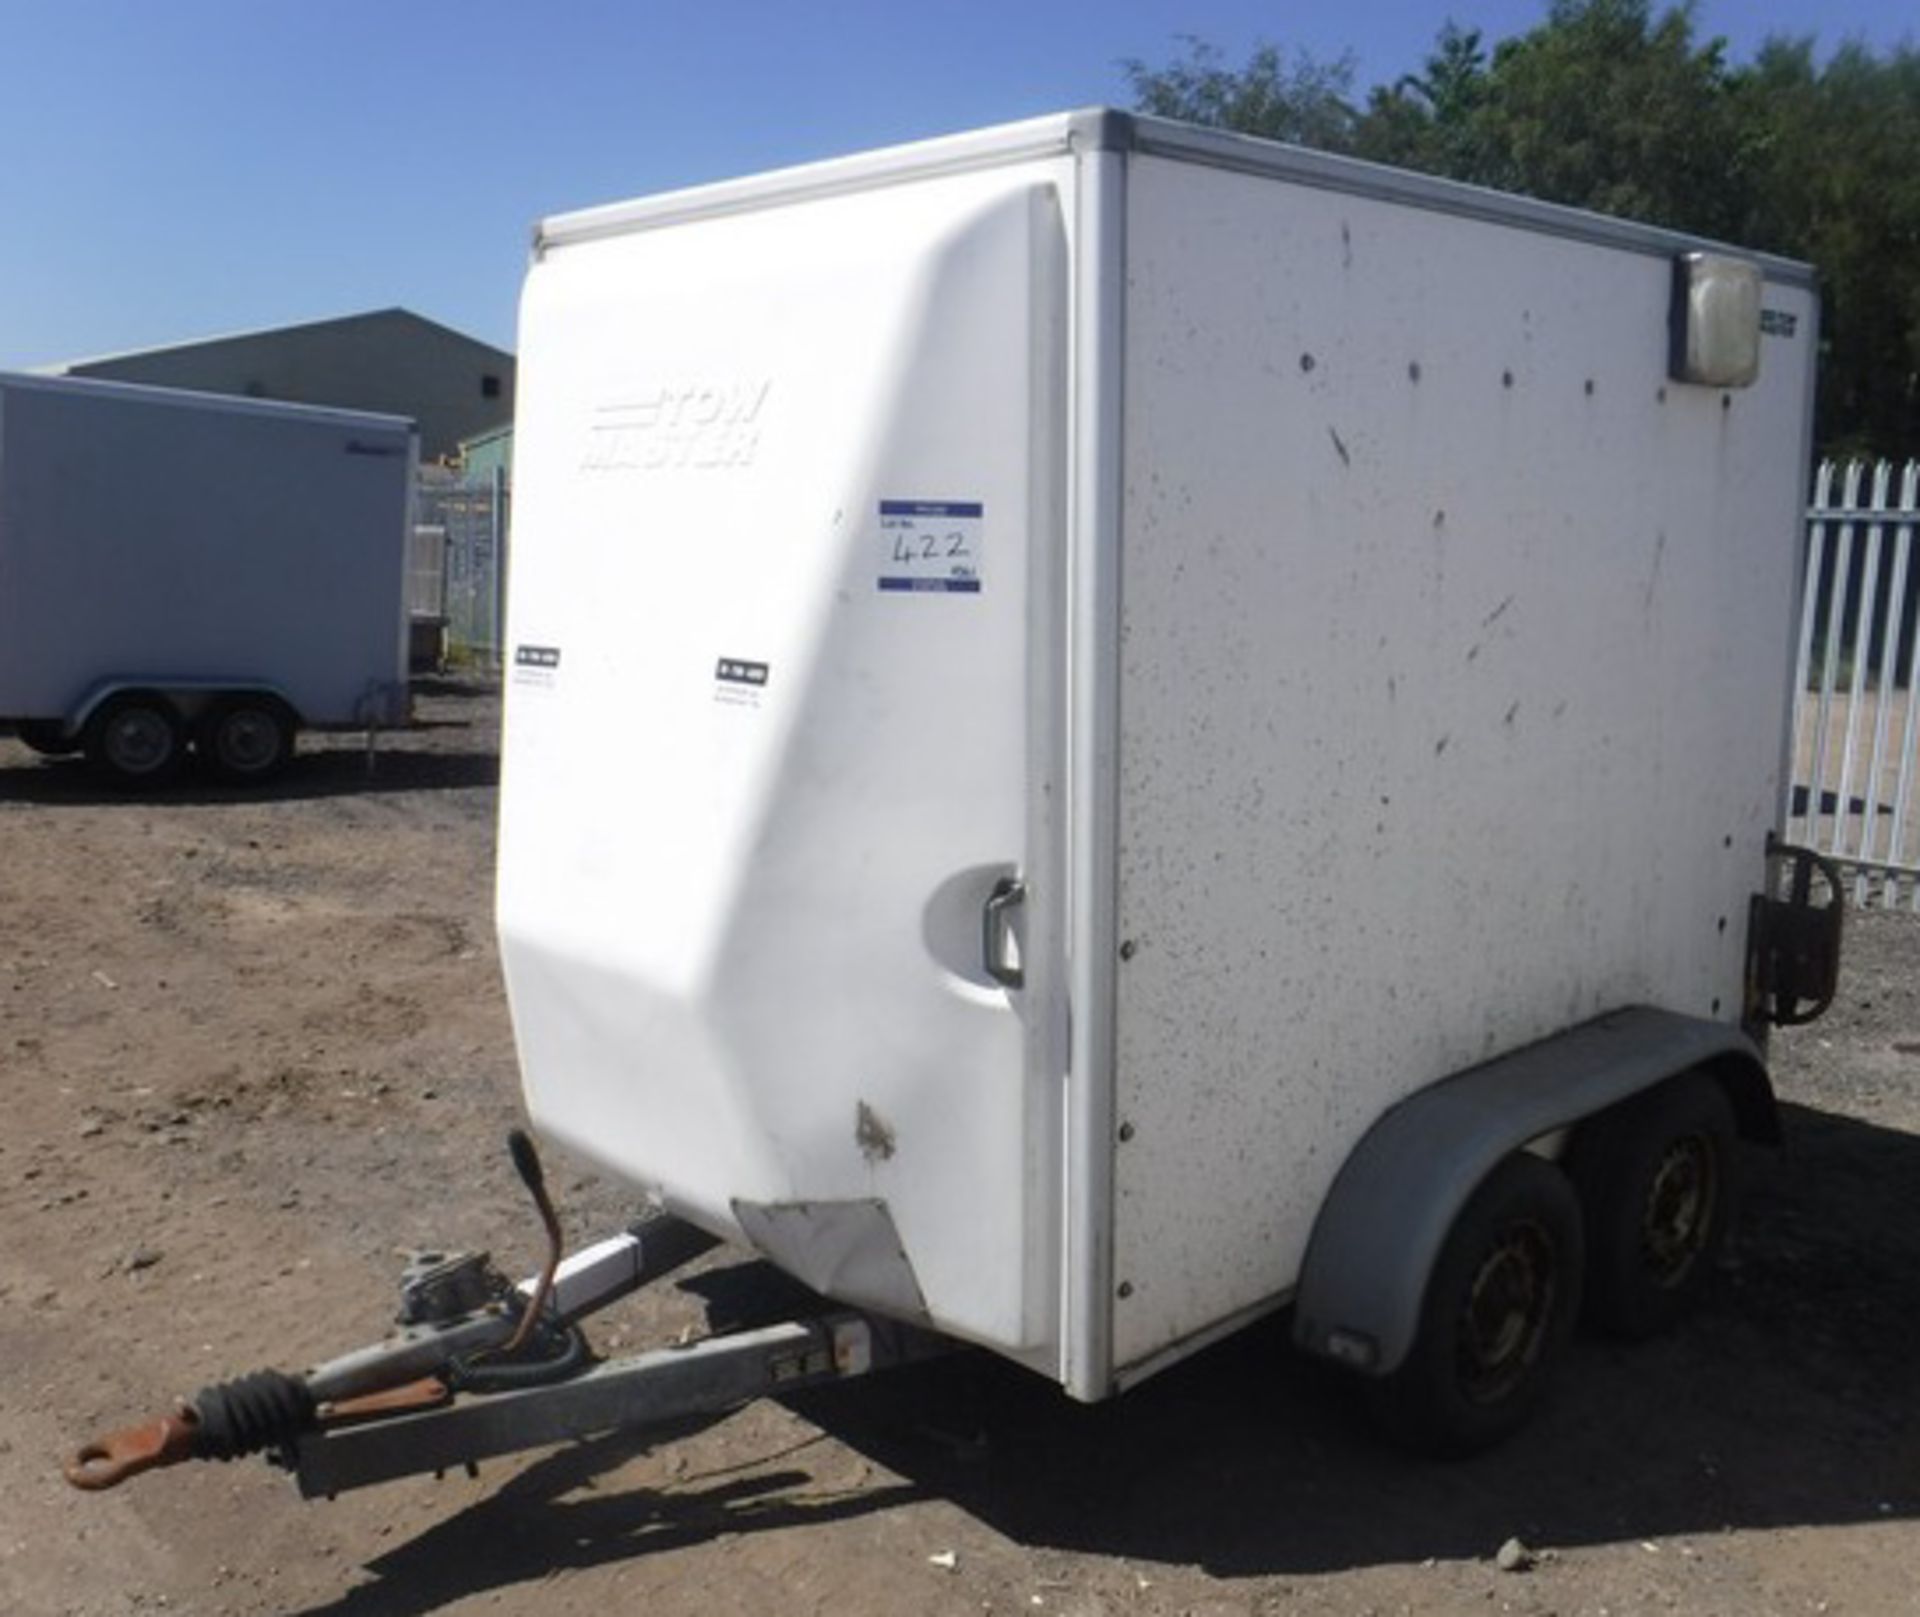 TOWMASTER 8' x 5' twin axle box trailer. Wired with power points. VIN - TM060466. Asset no. 758-6203